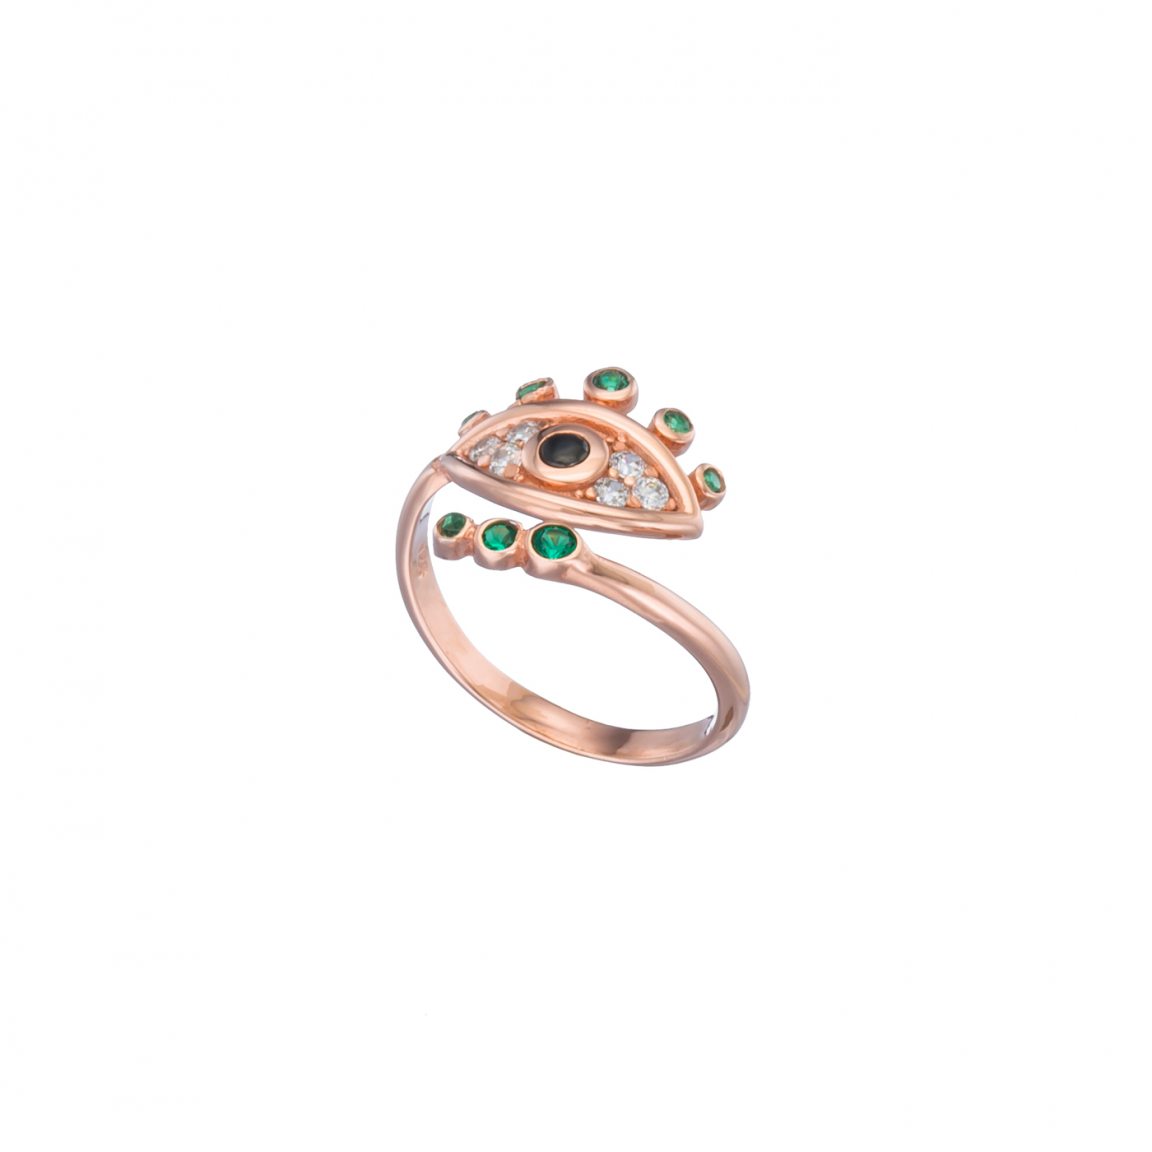 Rose gold plated ring with eye